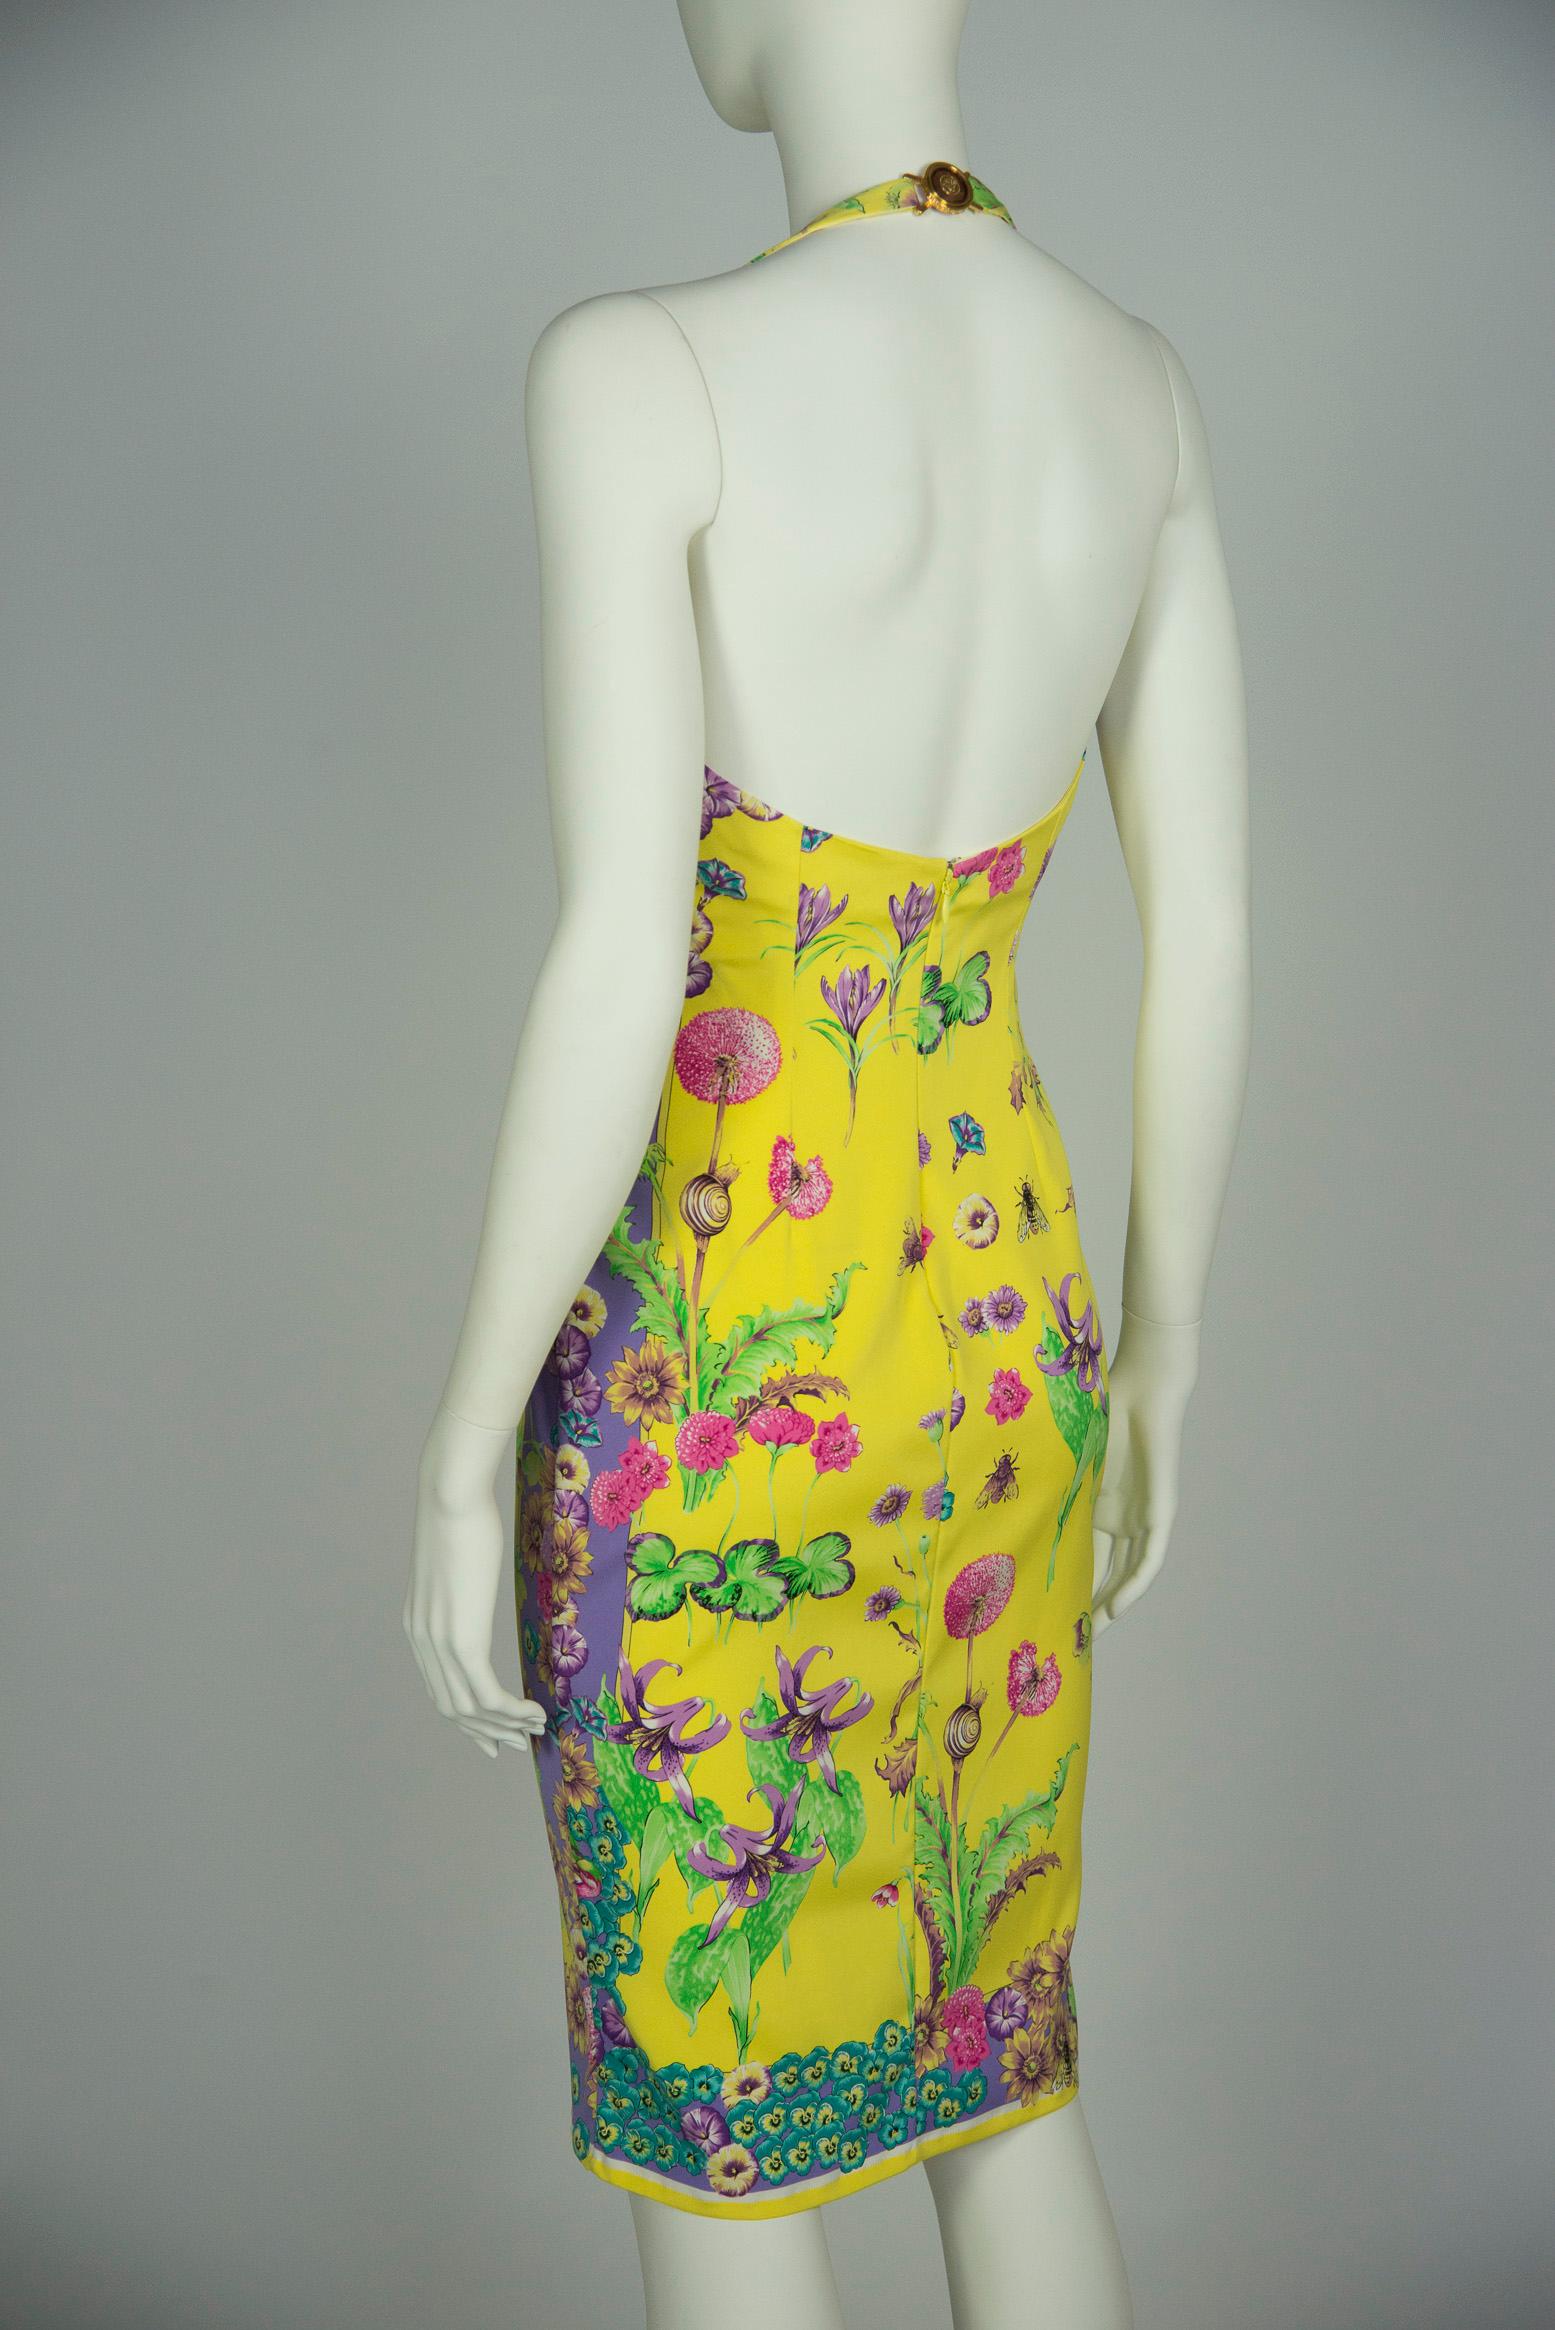 Gianni Versace Couture Printed Halterneck Dress, Circa 1995-1996 For Sale 7